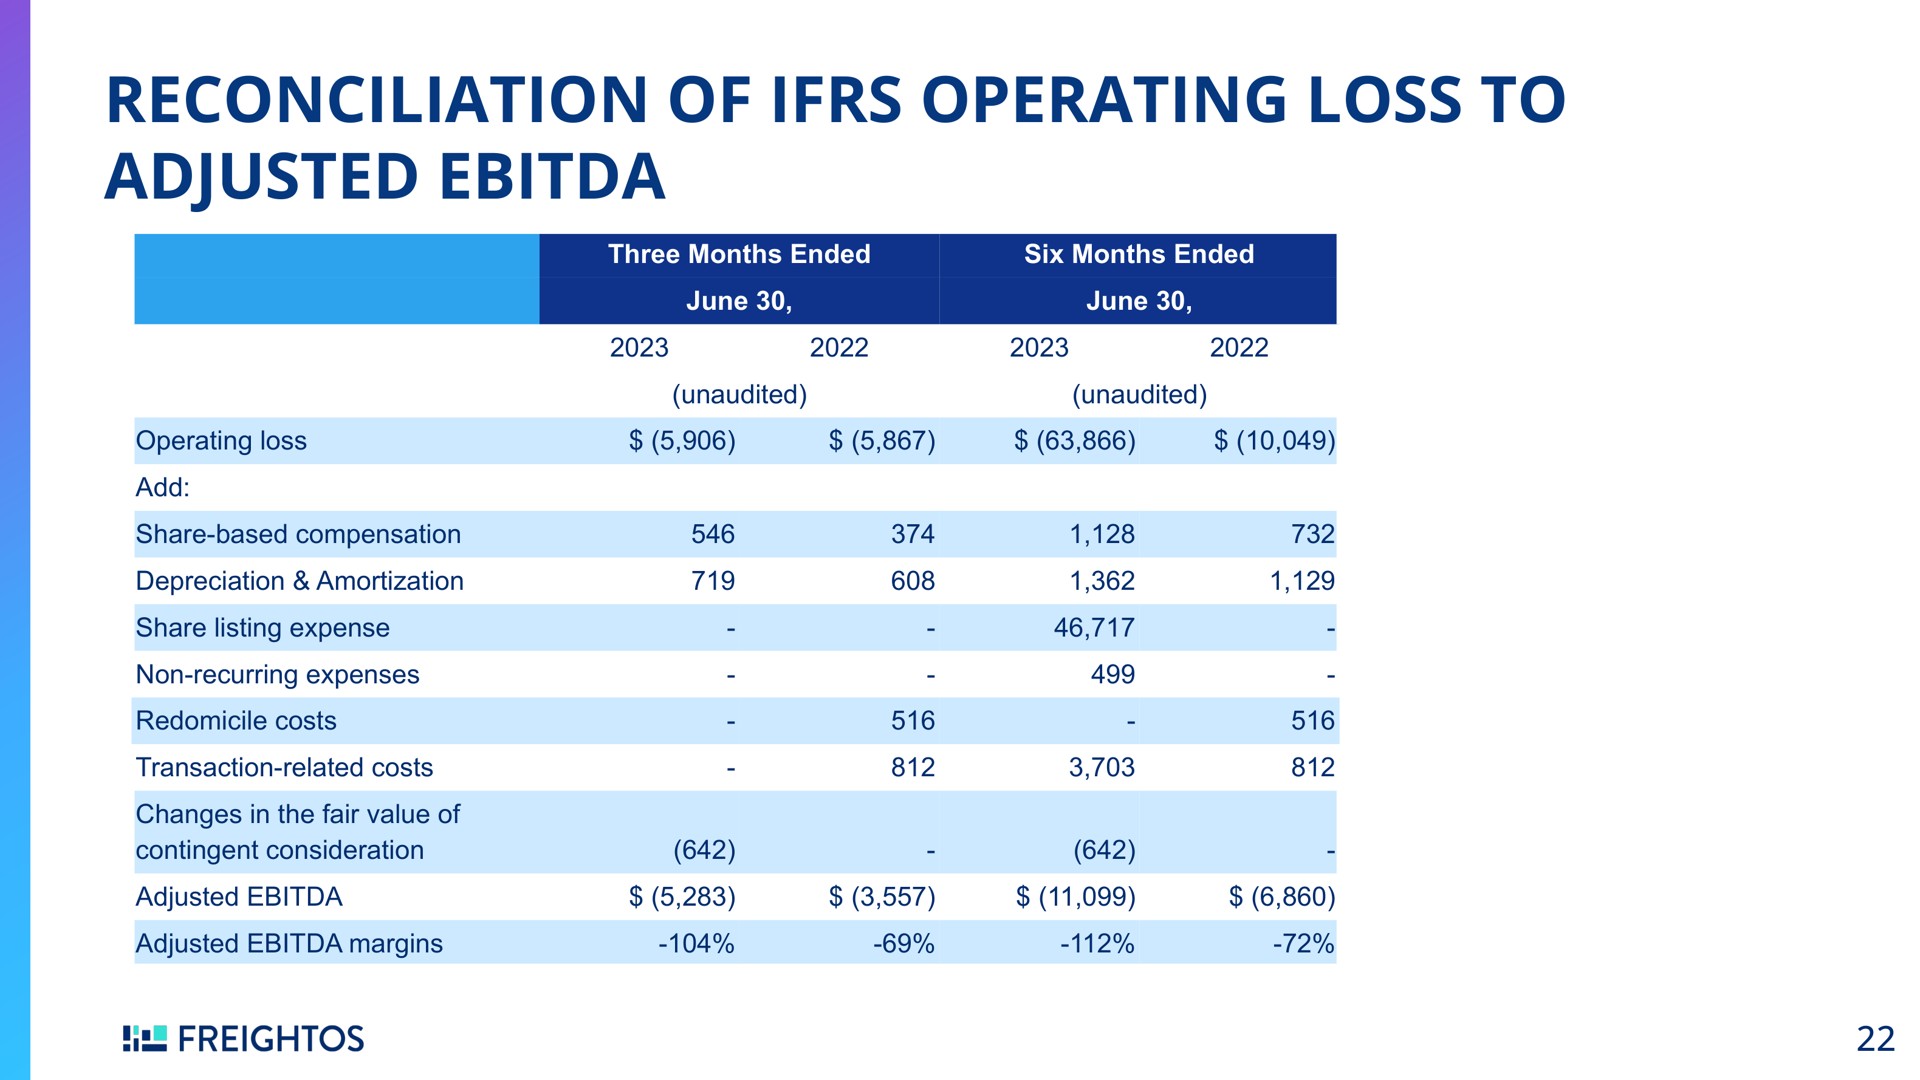 reconciliation of operating loss to adjusted three months ended | Freightos